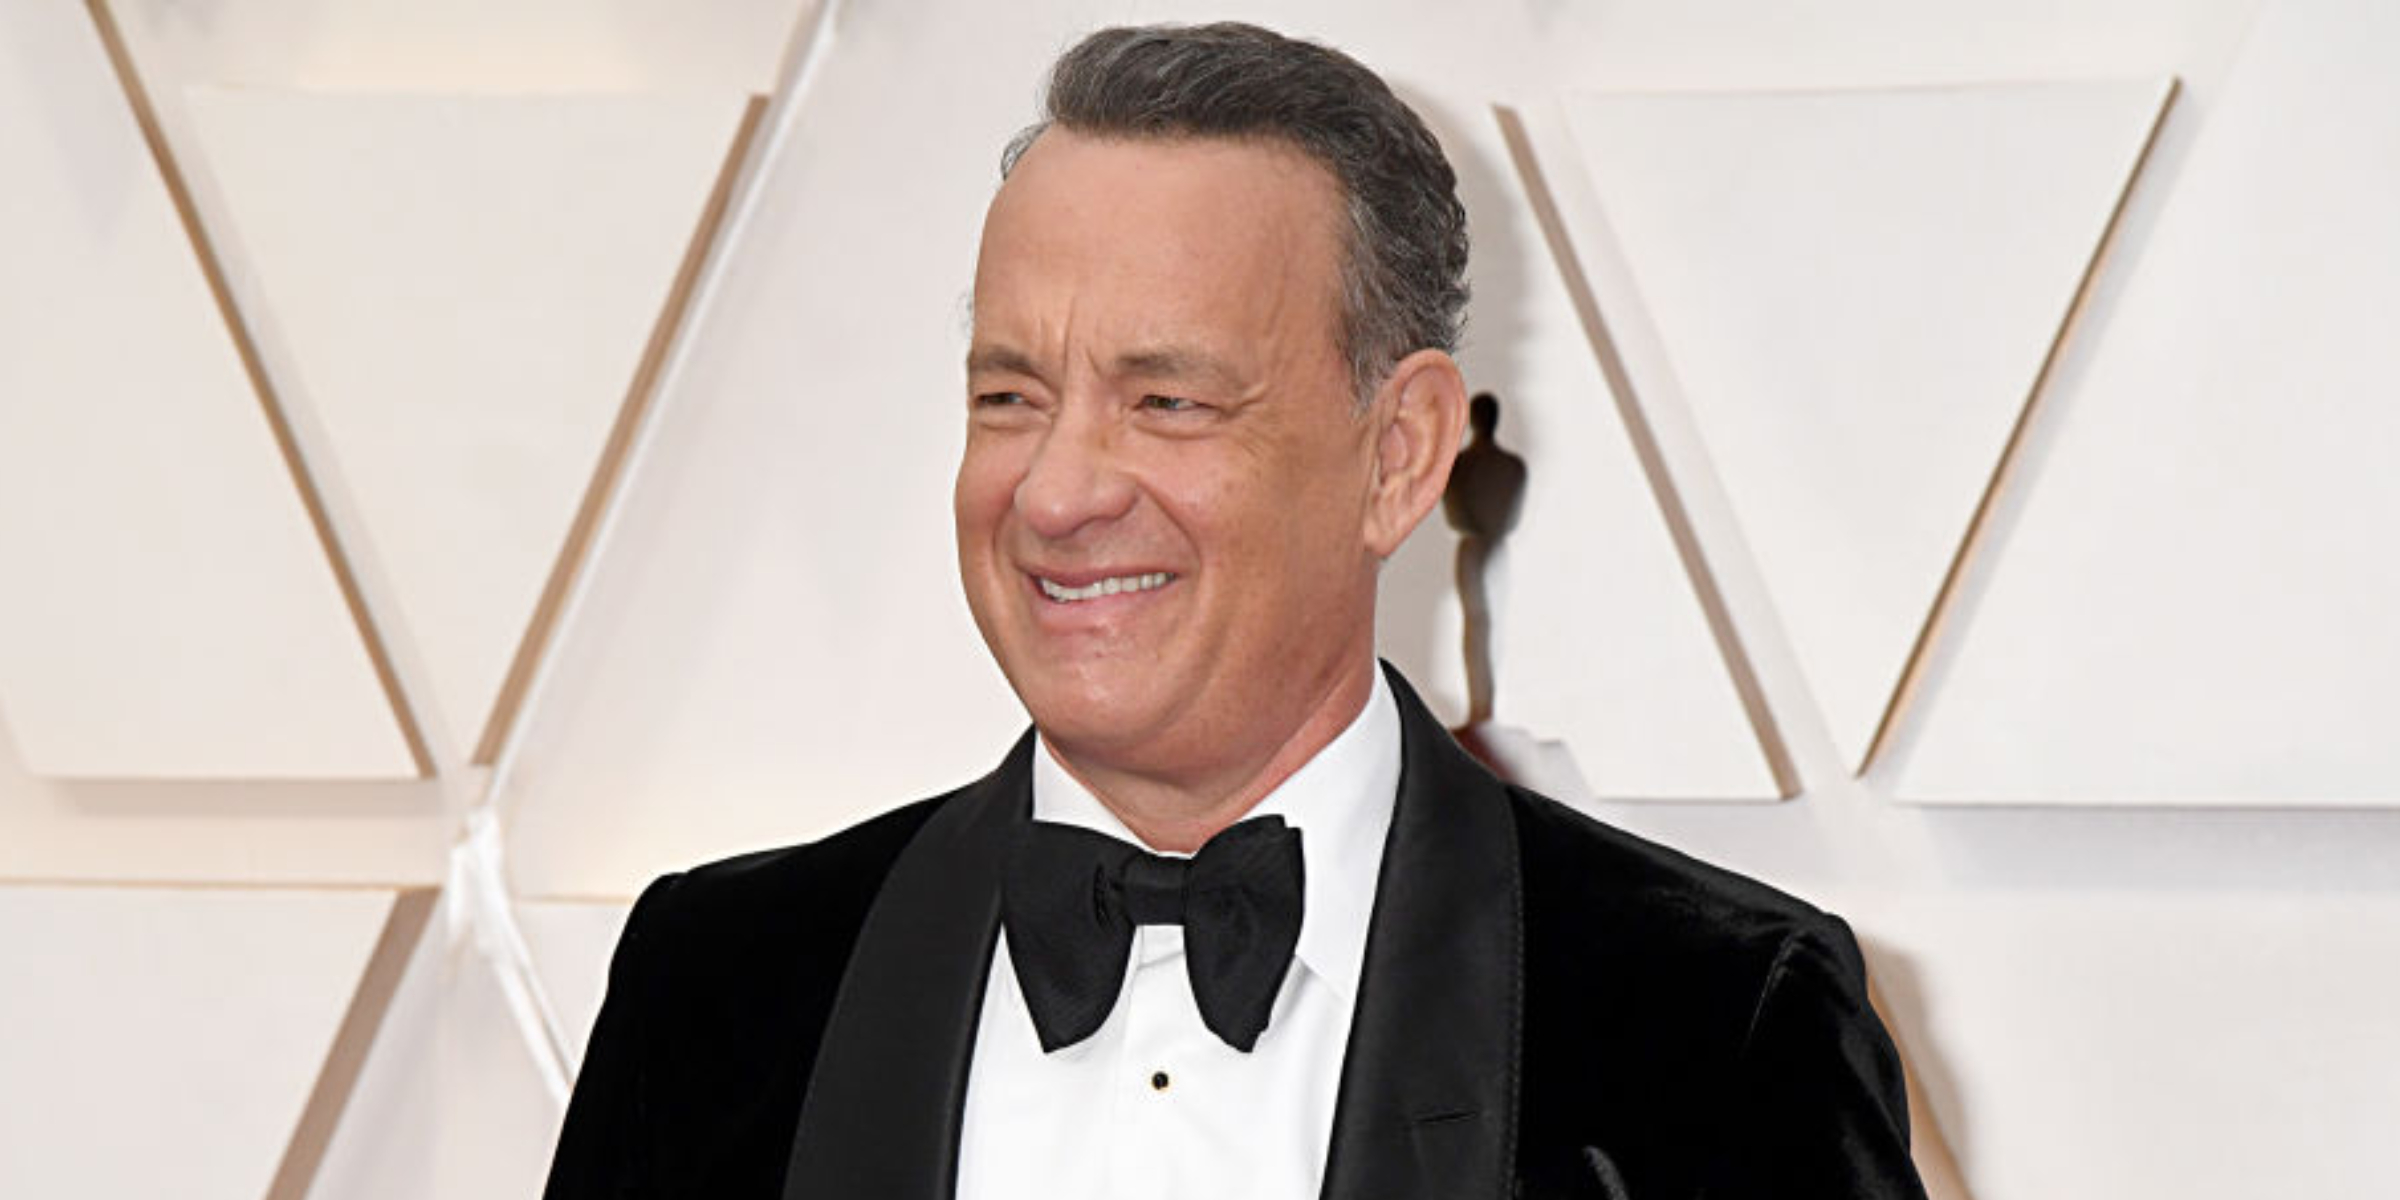 Tom Hanks | Source: Getty Images